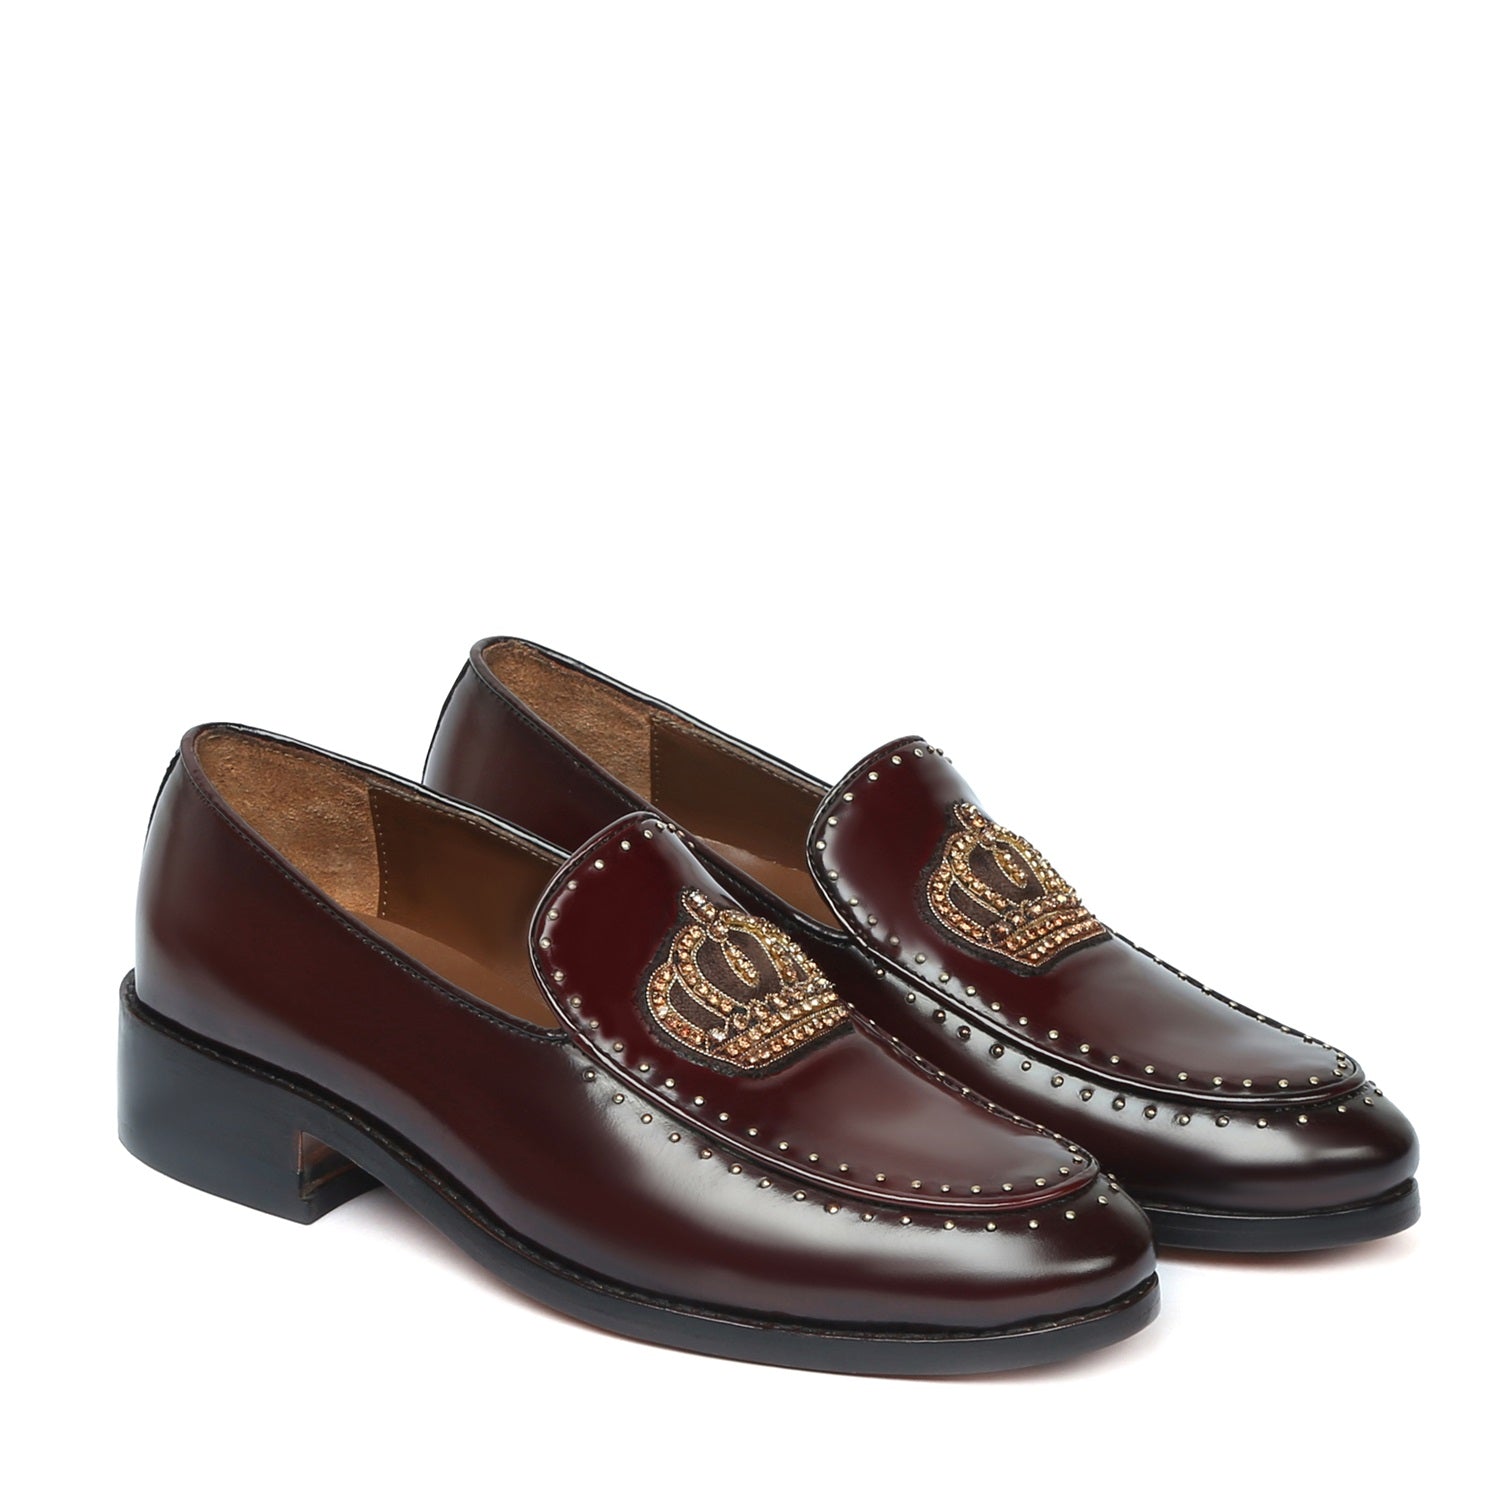 Studded Apron Leather Loafers in Wine Patent Crown Zardosi